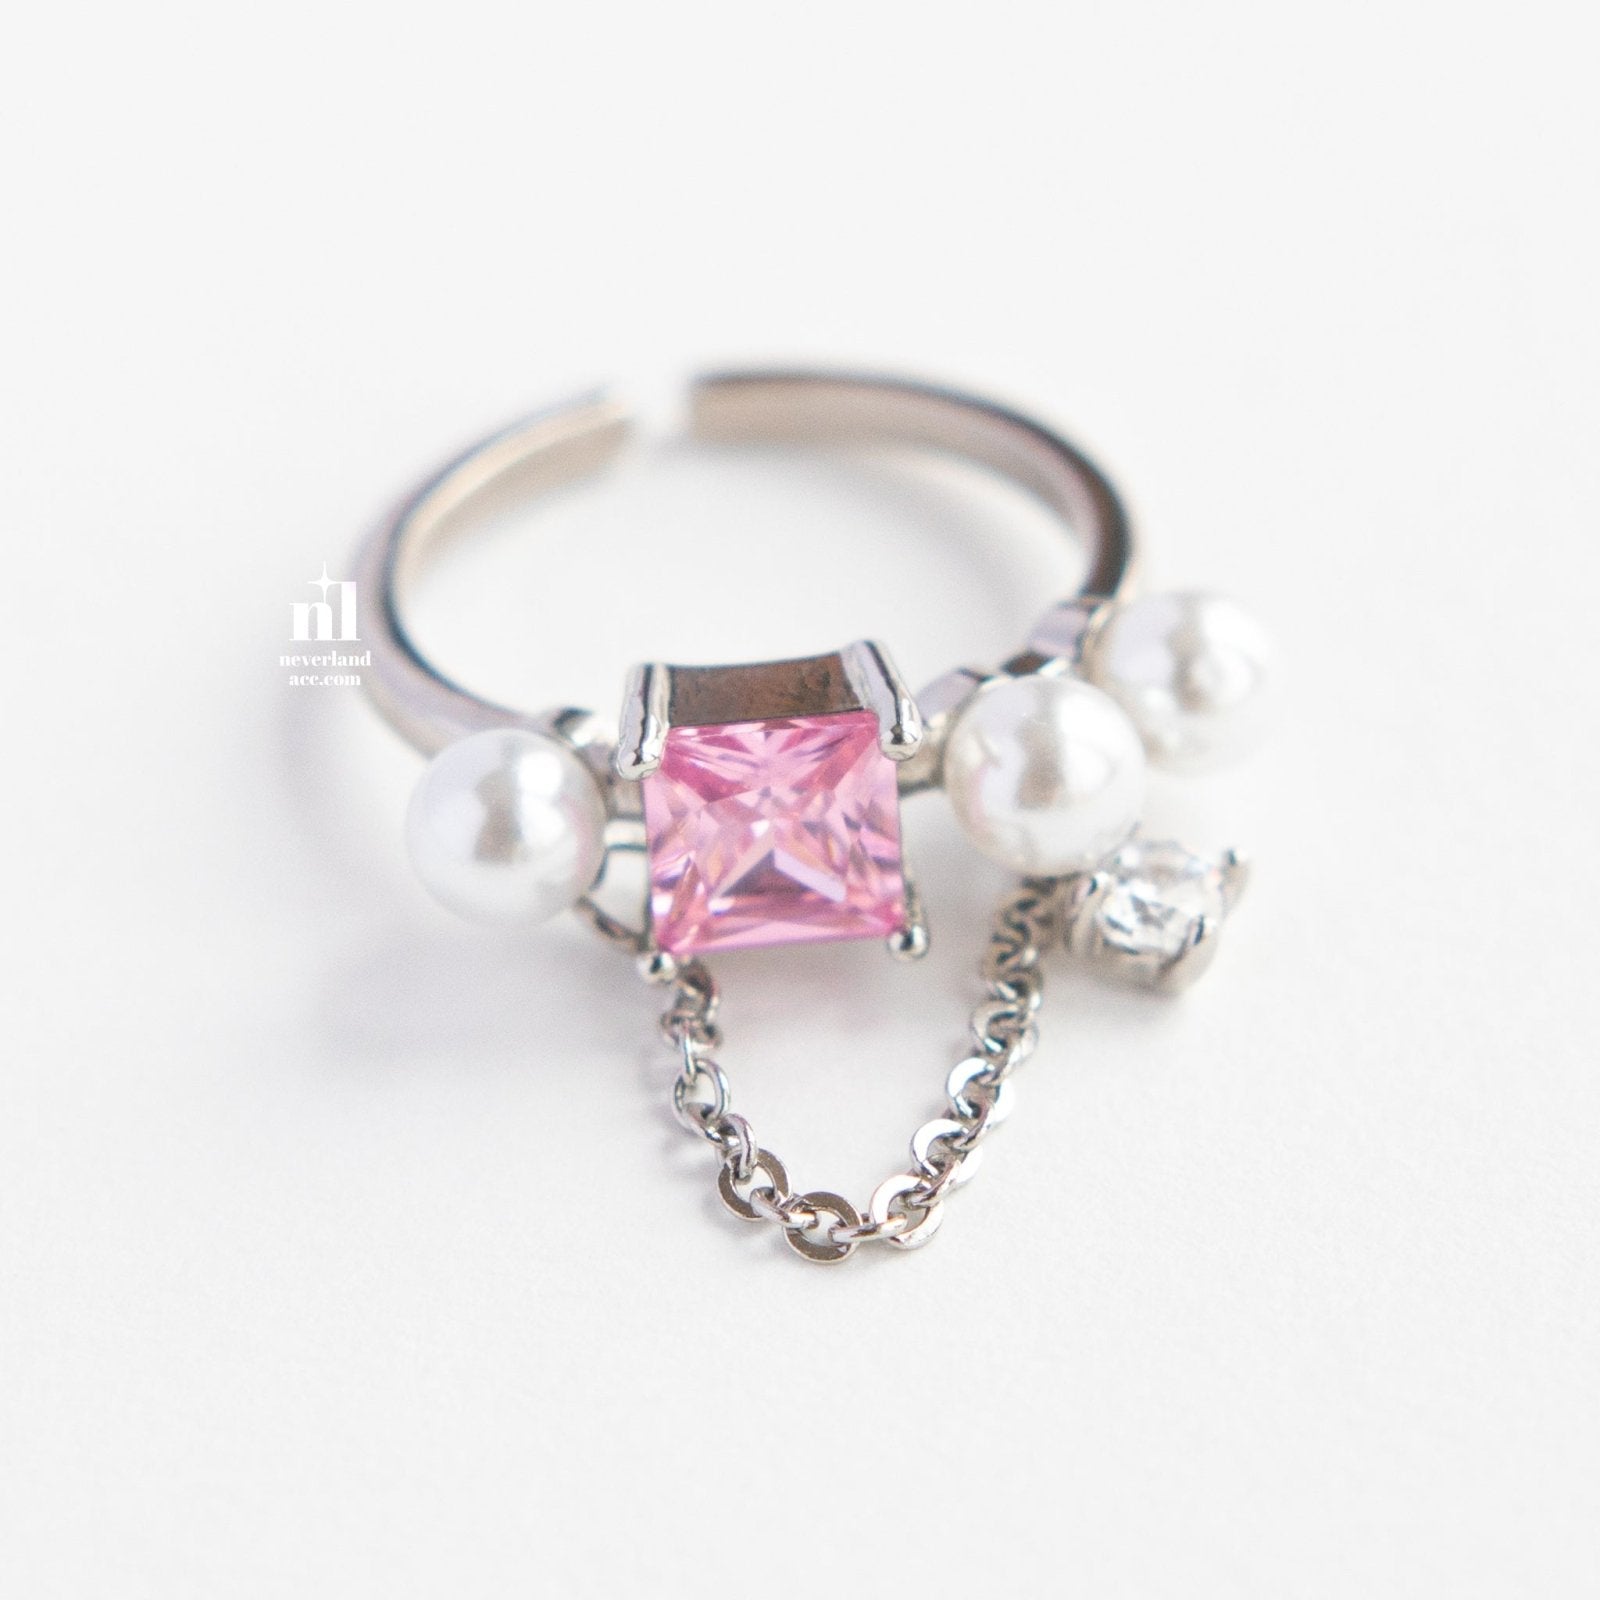 Pink Cube Pendant Ring - neverland accessories